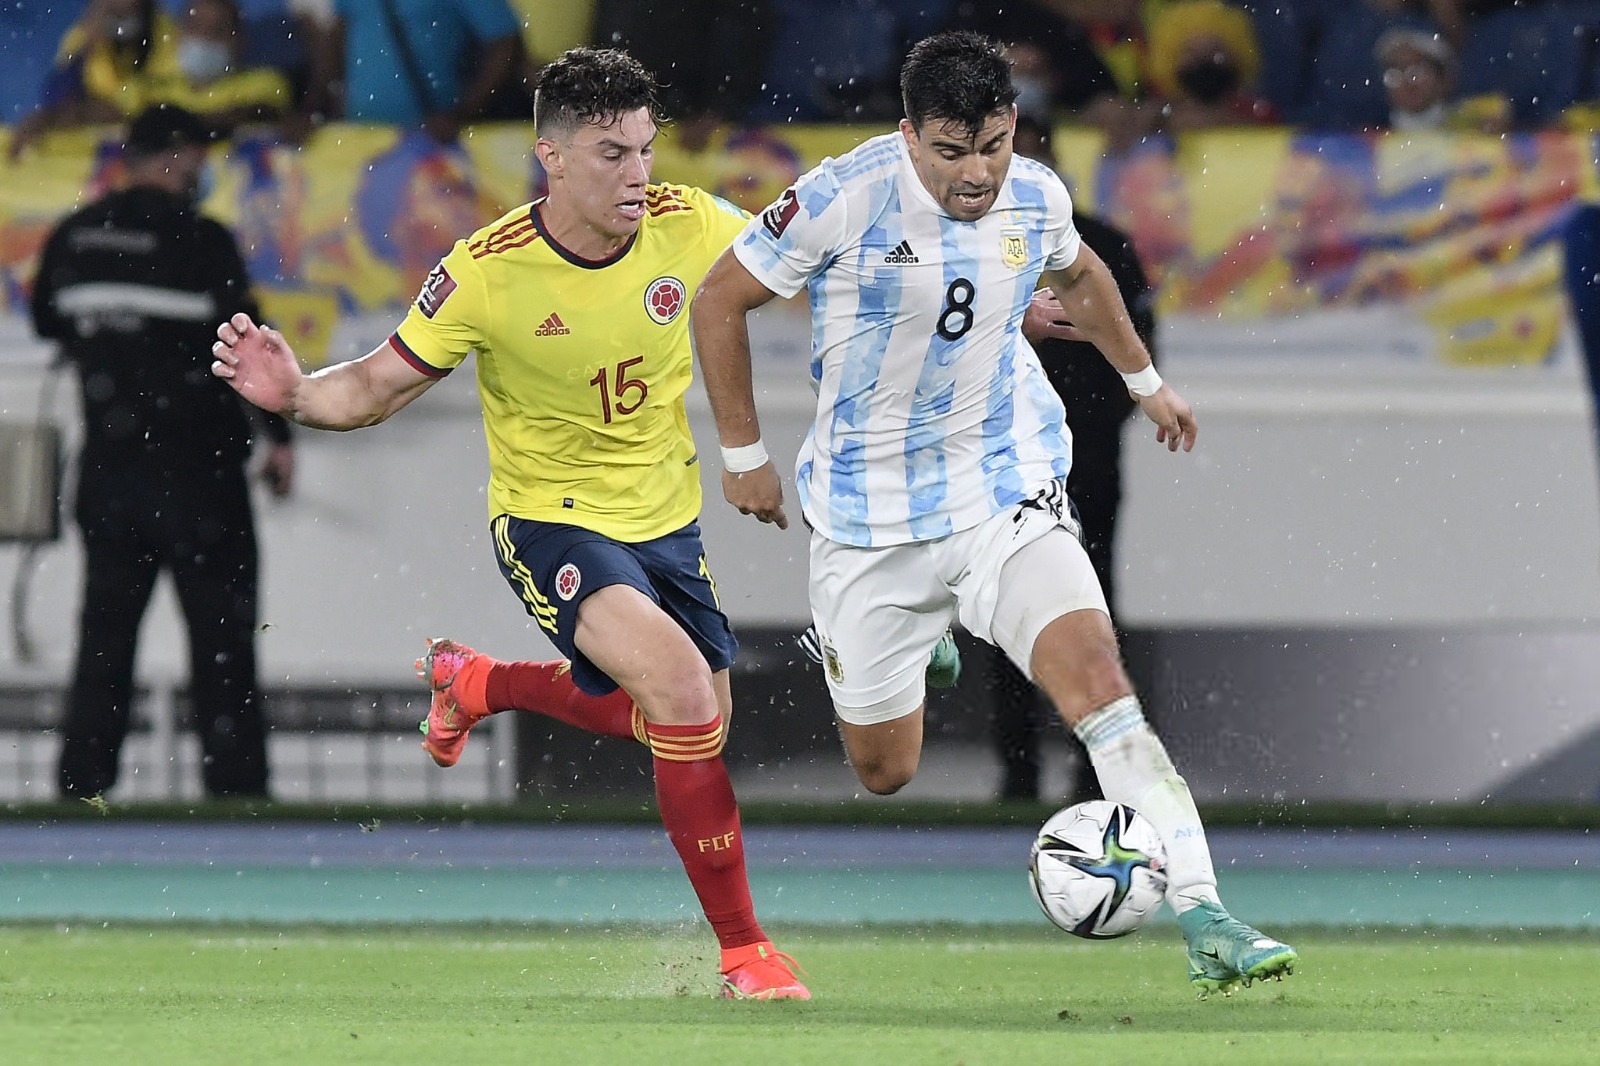 Acuña in the match vs Colombia